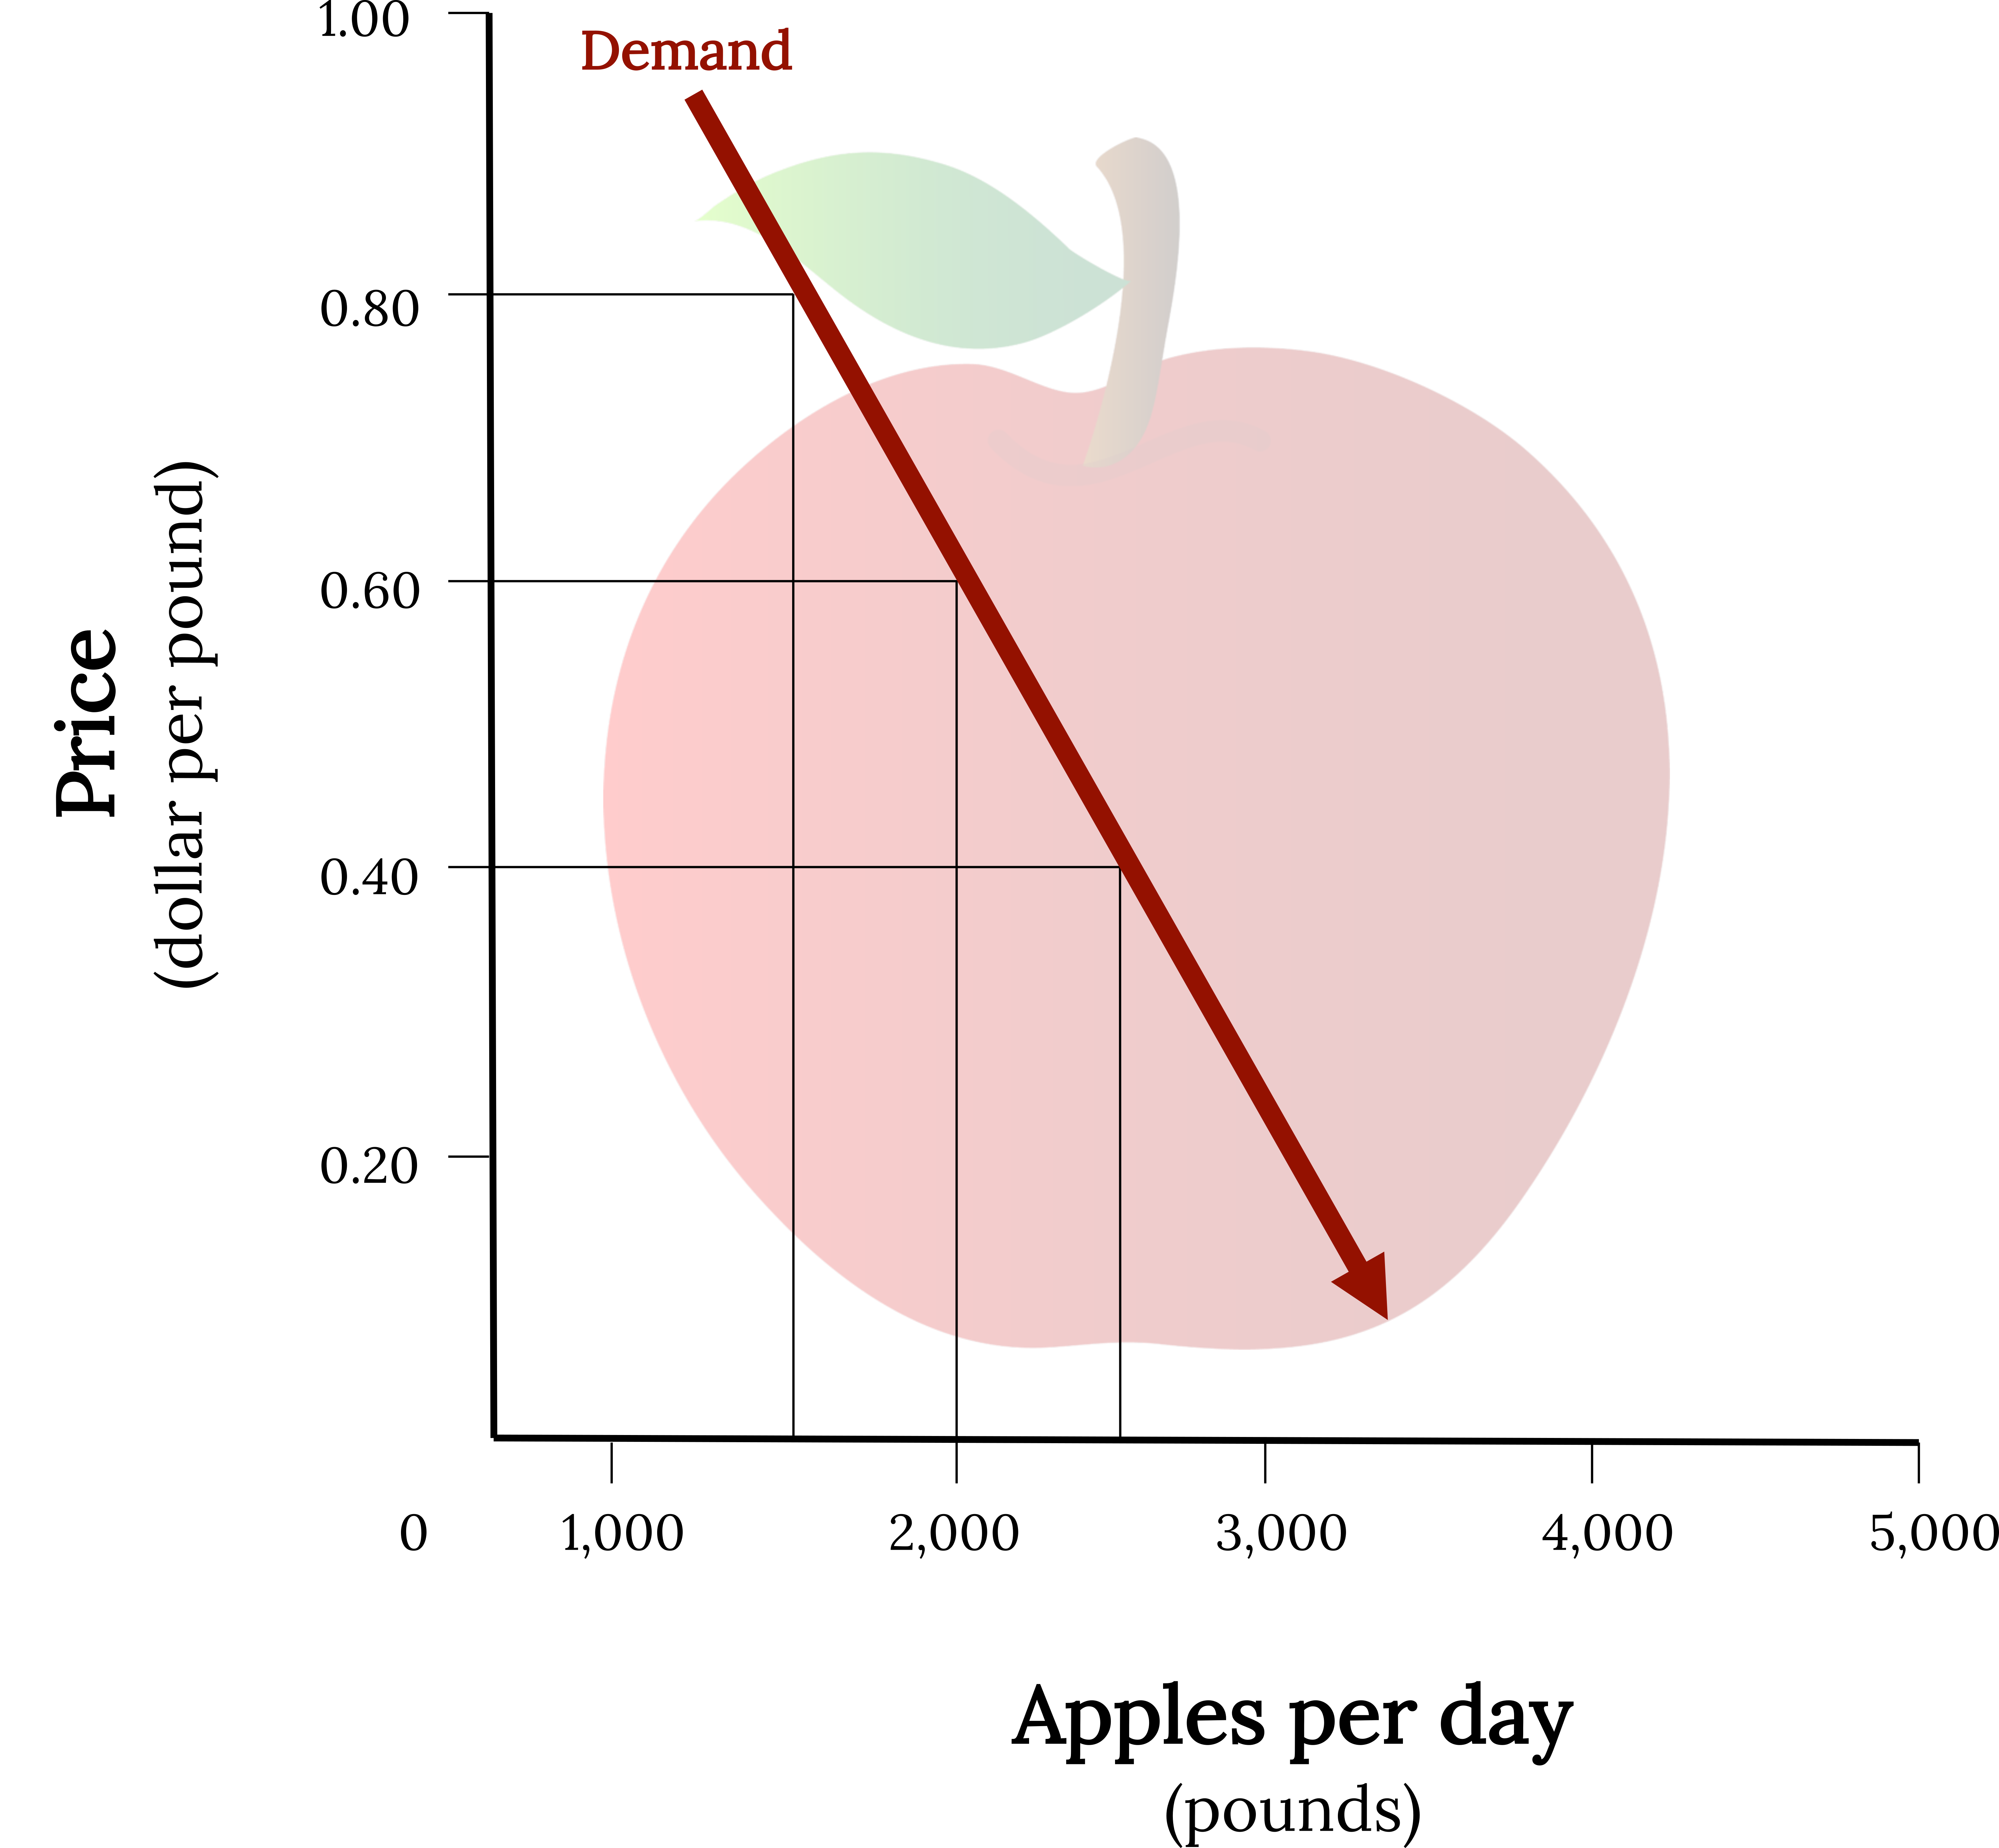 In the background is an apple. In the foreground is an x, y plot of the demand curve of apples. The x-axis, representing peaches (pounds per day) extends from 0 to 5,000 in 1,000 increments. The y-axis, price (dollars per pound) extends from 0 to 1.00 in 0.20 increments. The curve is a straight, negative line. Three dashed lines show points of intersection from the y-axis to the x-axis. The first dashed line set extends from 0.80 on the y-axis to the curve, and down from the curve to a point between 1,000 and 2,000 on the x-axis. The second dashed line set extends from 0.60 to the curve, then from the curve to 2,000 on the x-axis. The third dashed line set extends from 0.40 on the y-axis to the curve, then from the curve to a point between 2,000 and 3,000 on the x-axis.